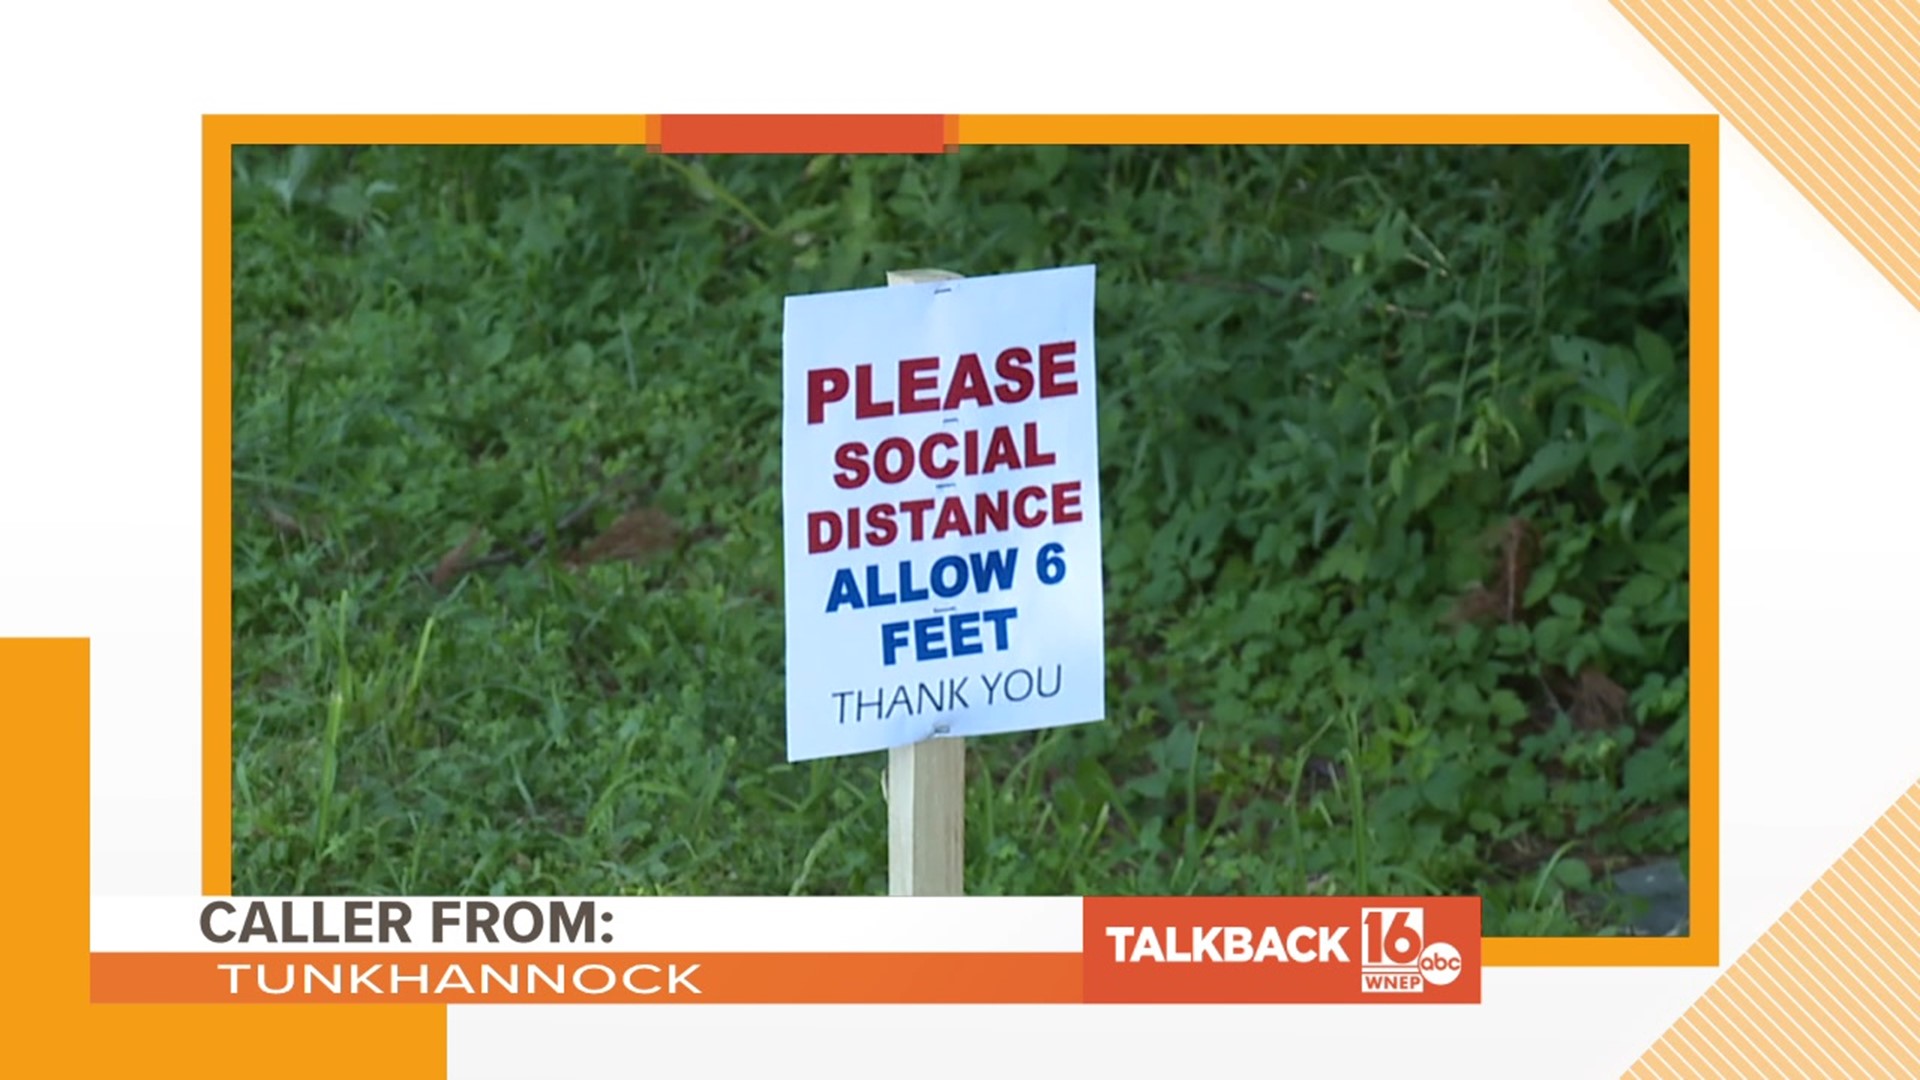 A caller from Tunkhannock calls Newswatch 16 "the COVID police" for coverage of the antique farm machinery show.